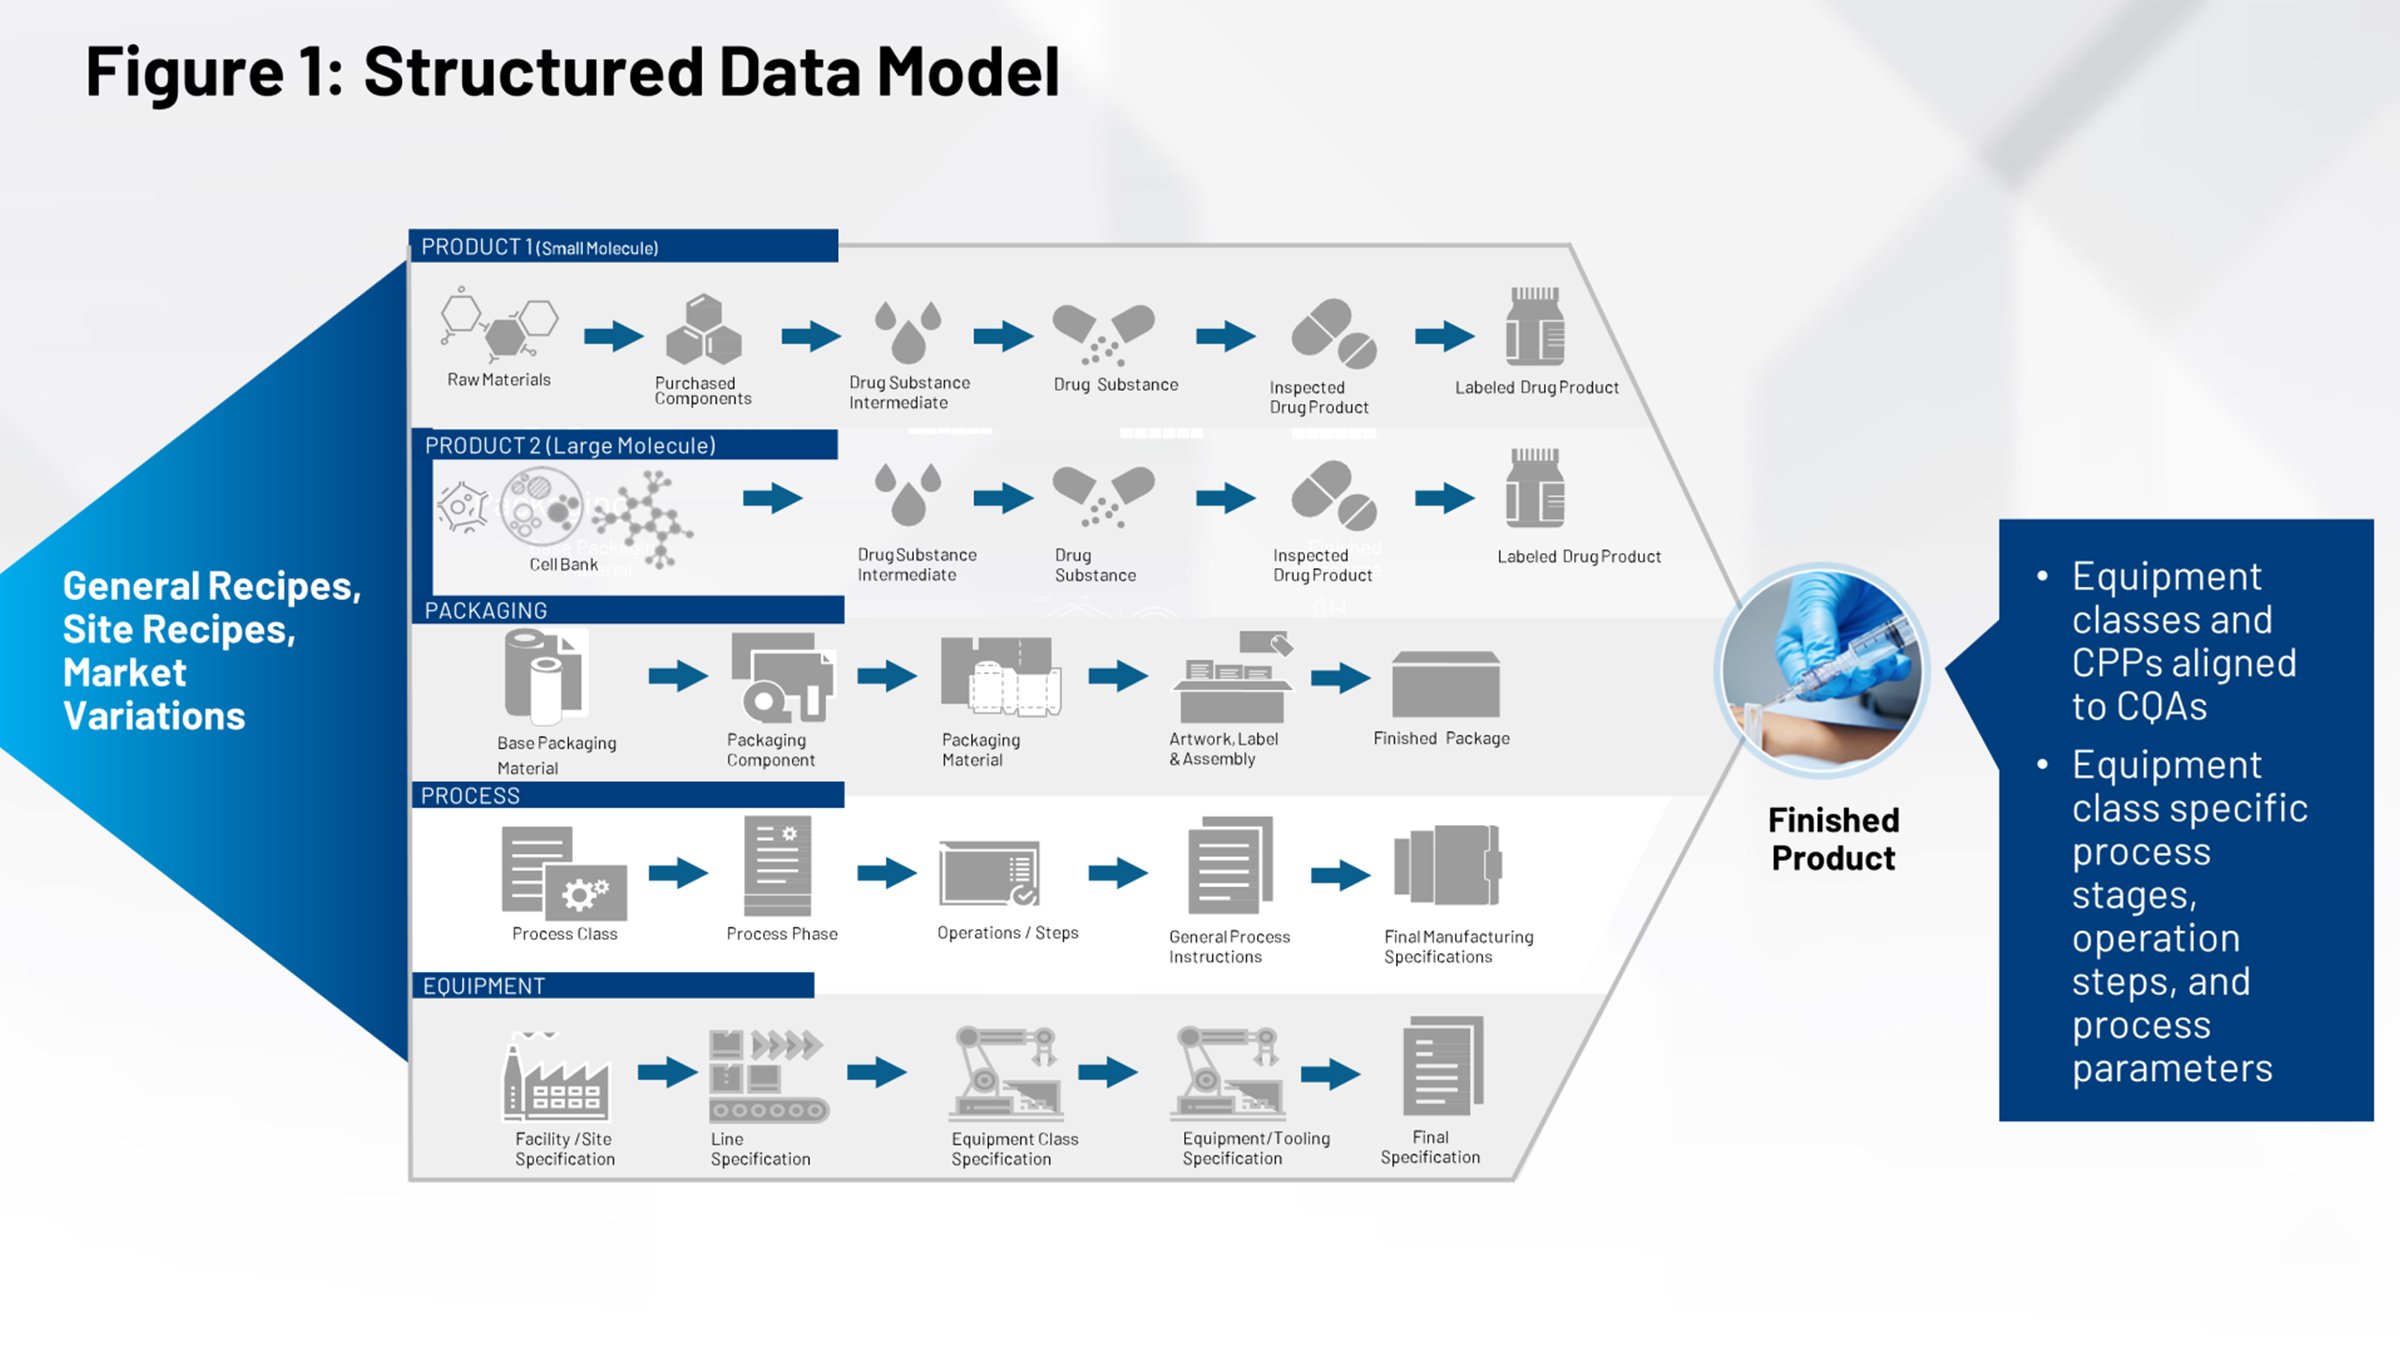 Figure 1: Structured Data Model for Life Sciences